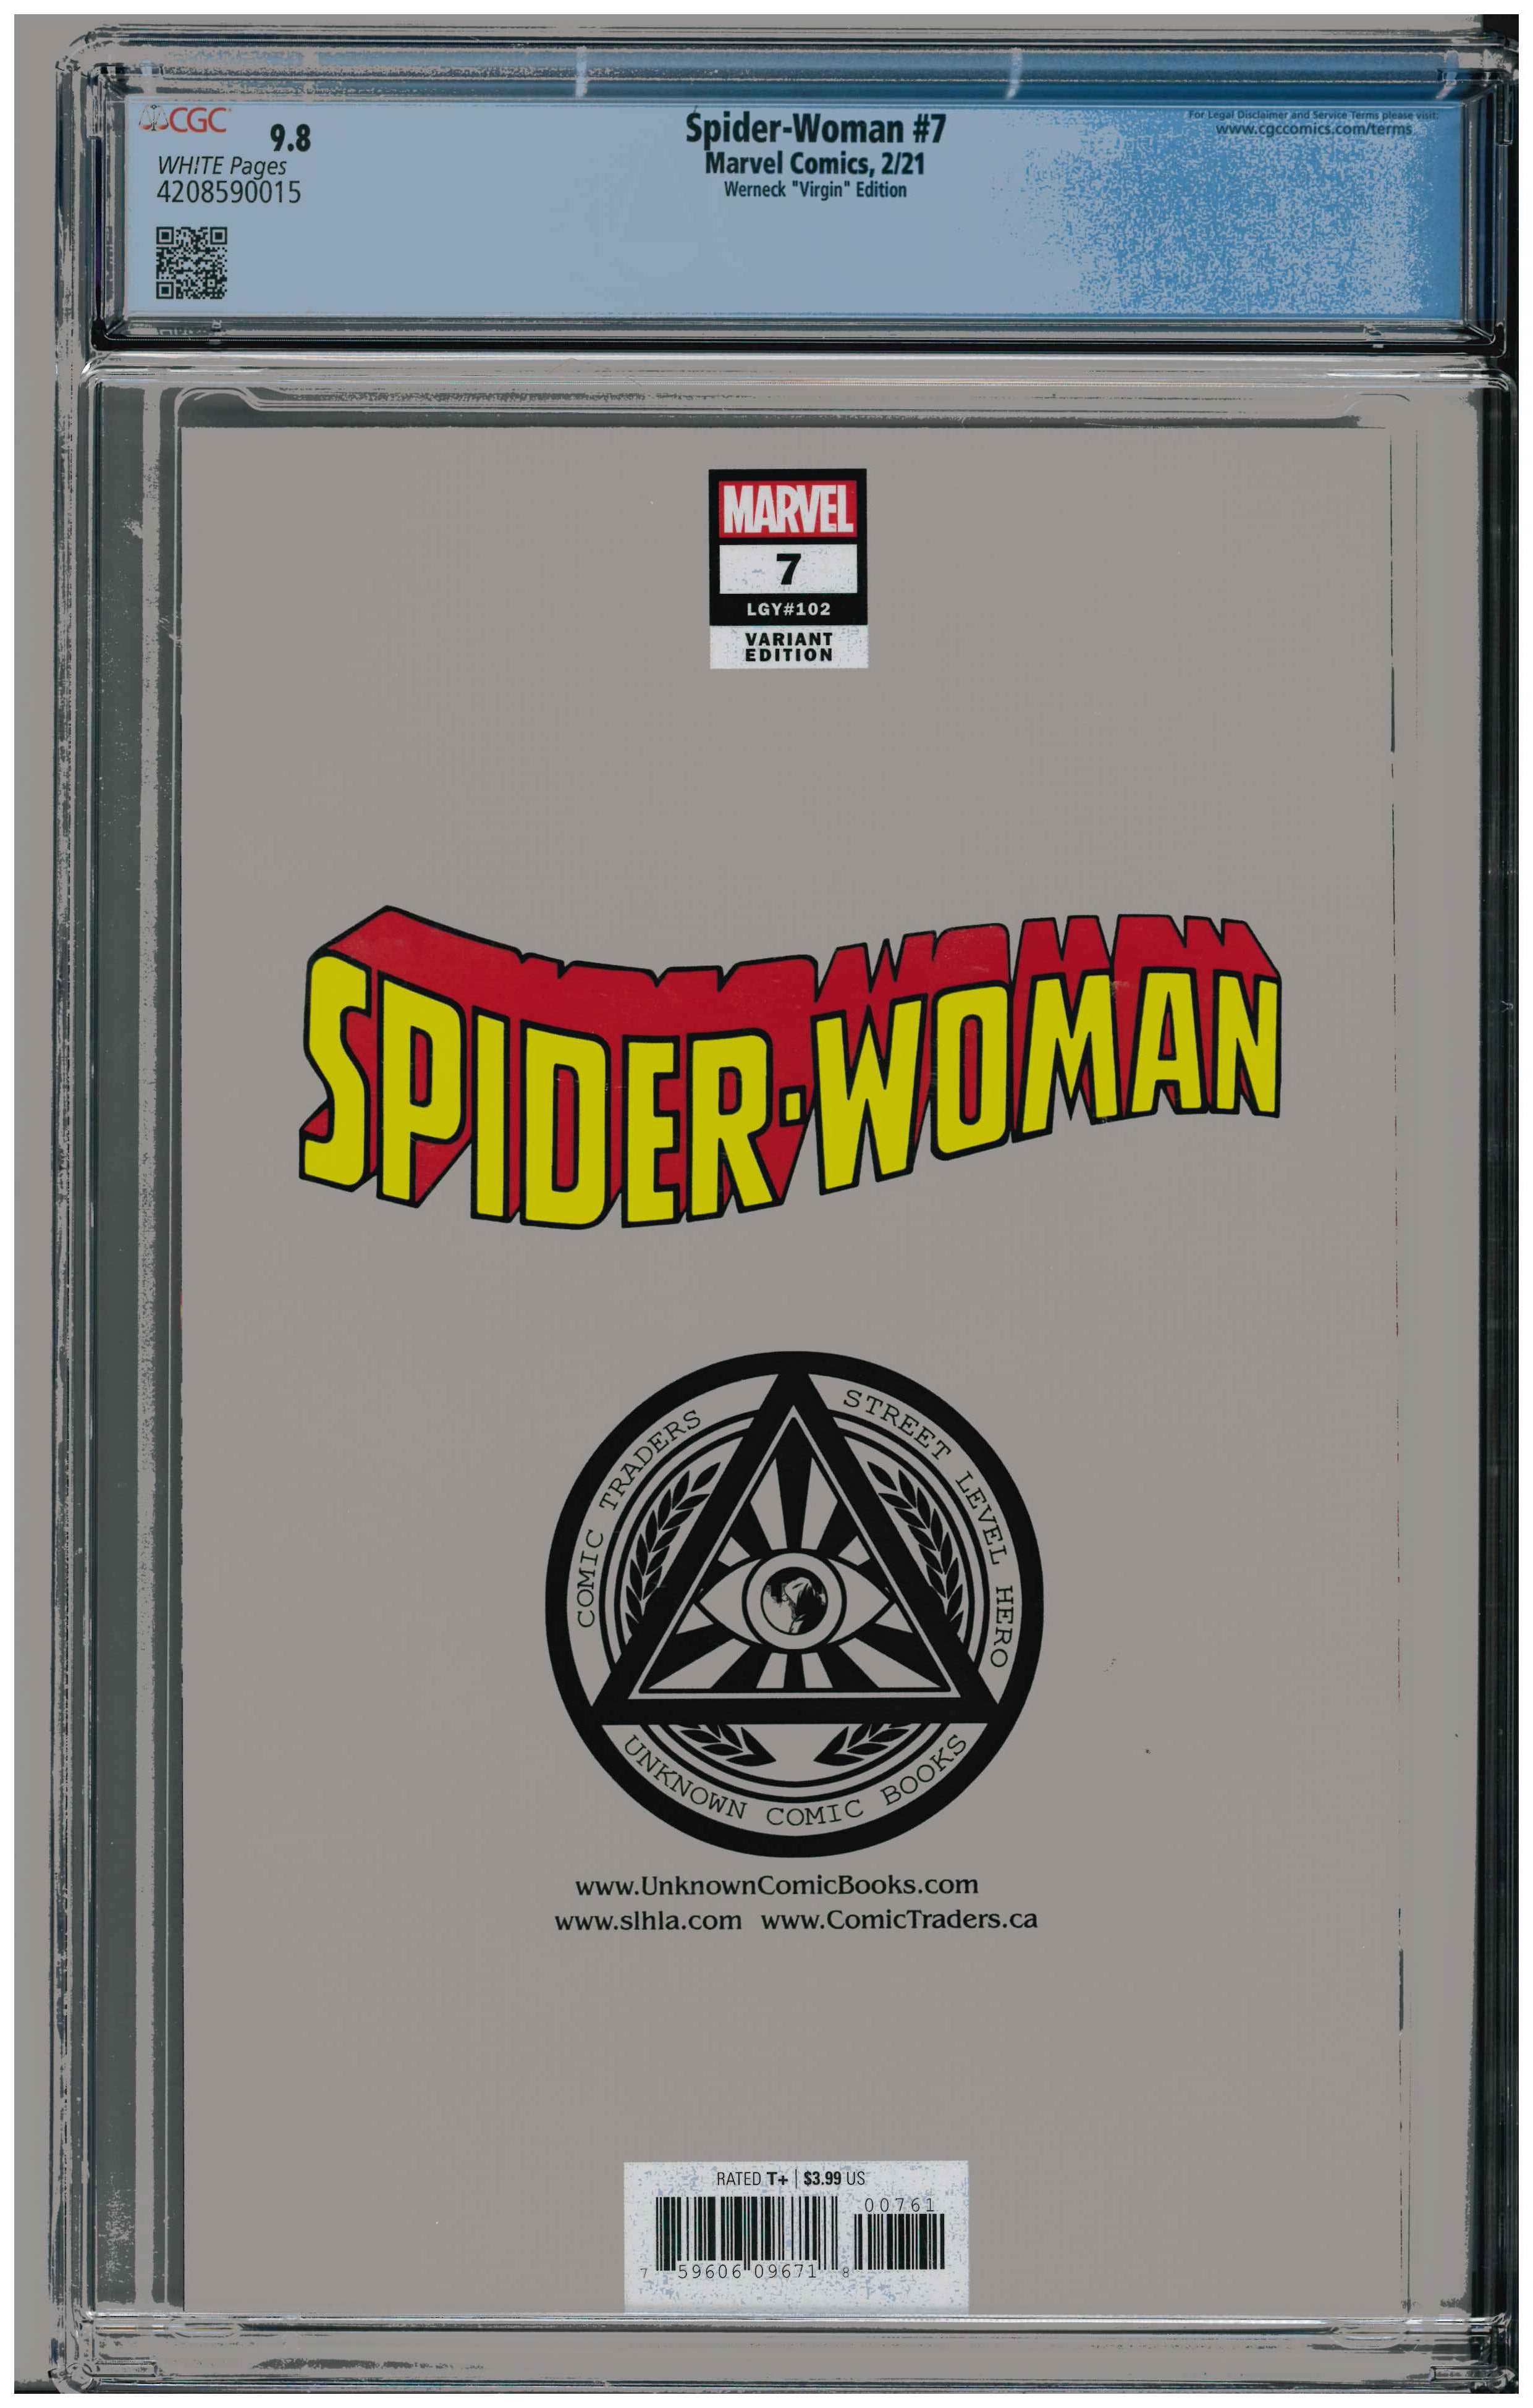 Spider-Woman #7 backside